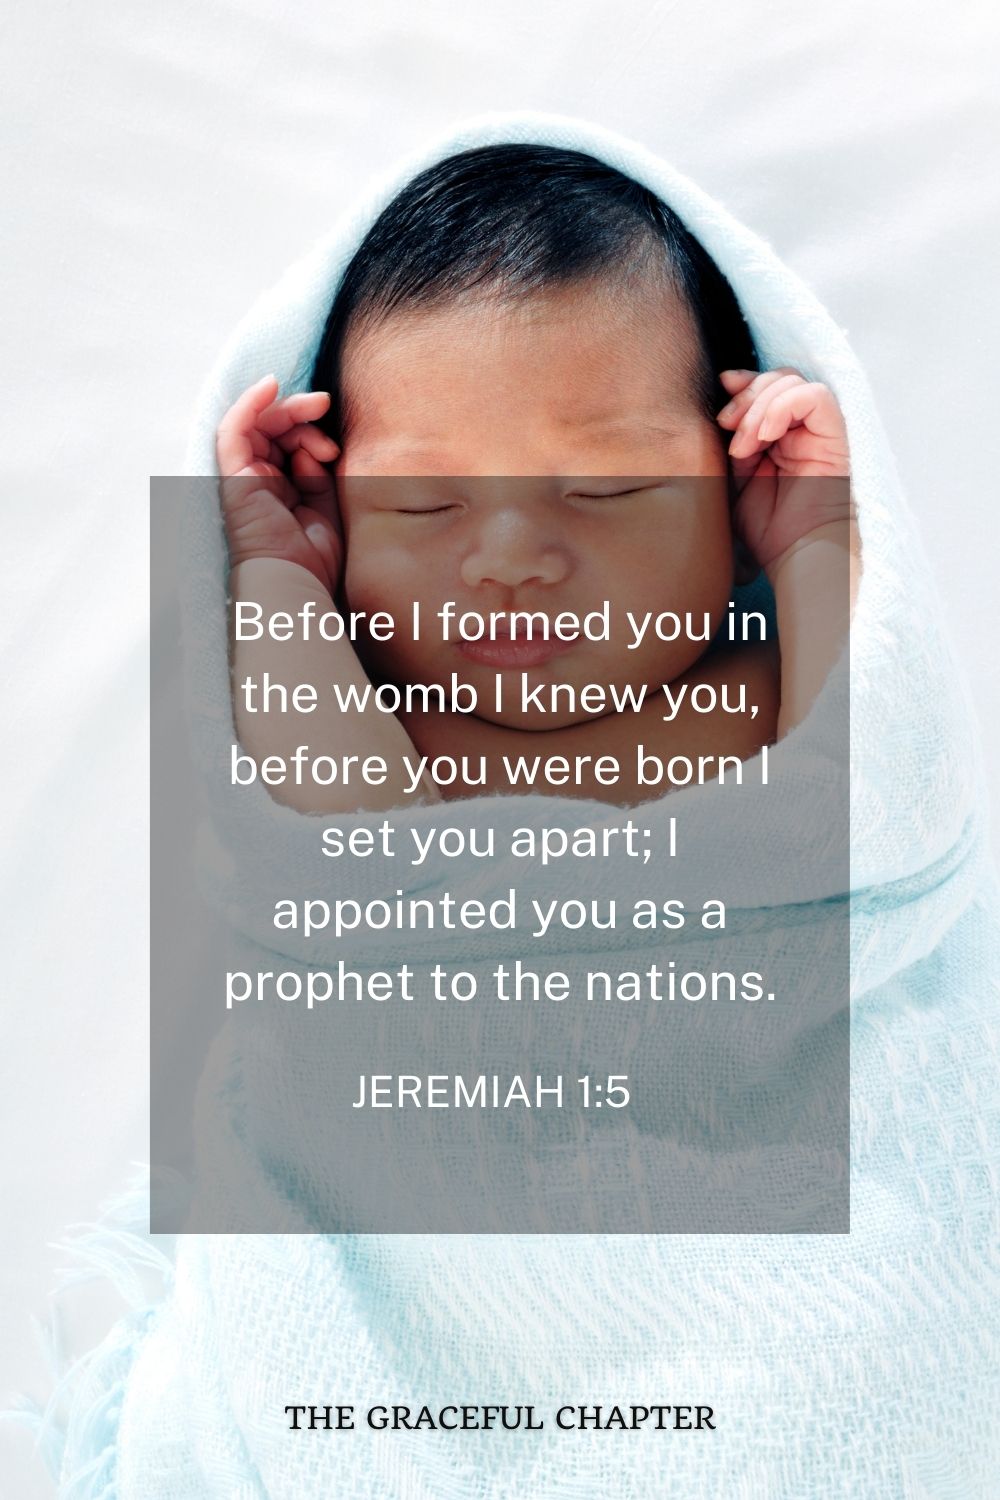 Before I formed you in the womb I knew you, before you were born I set you apart; I appointed you as a prophet to the nations. Jeremiah 1:5